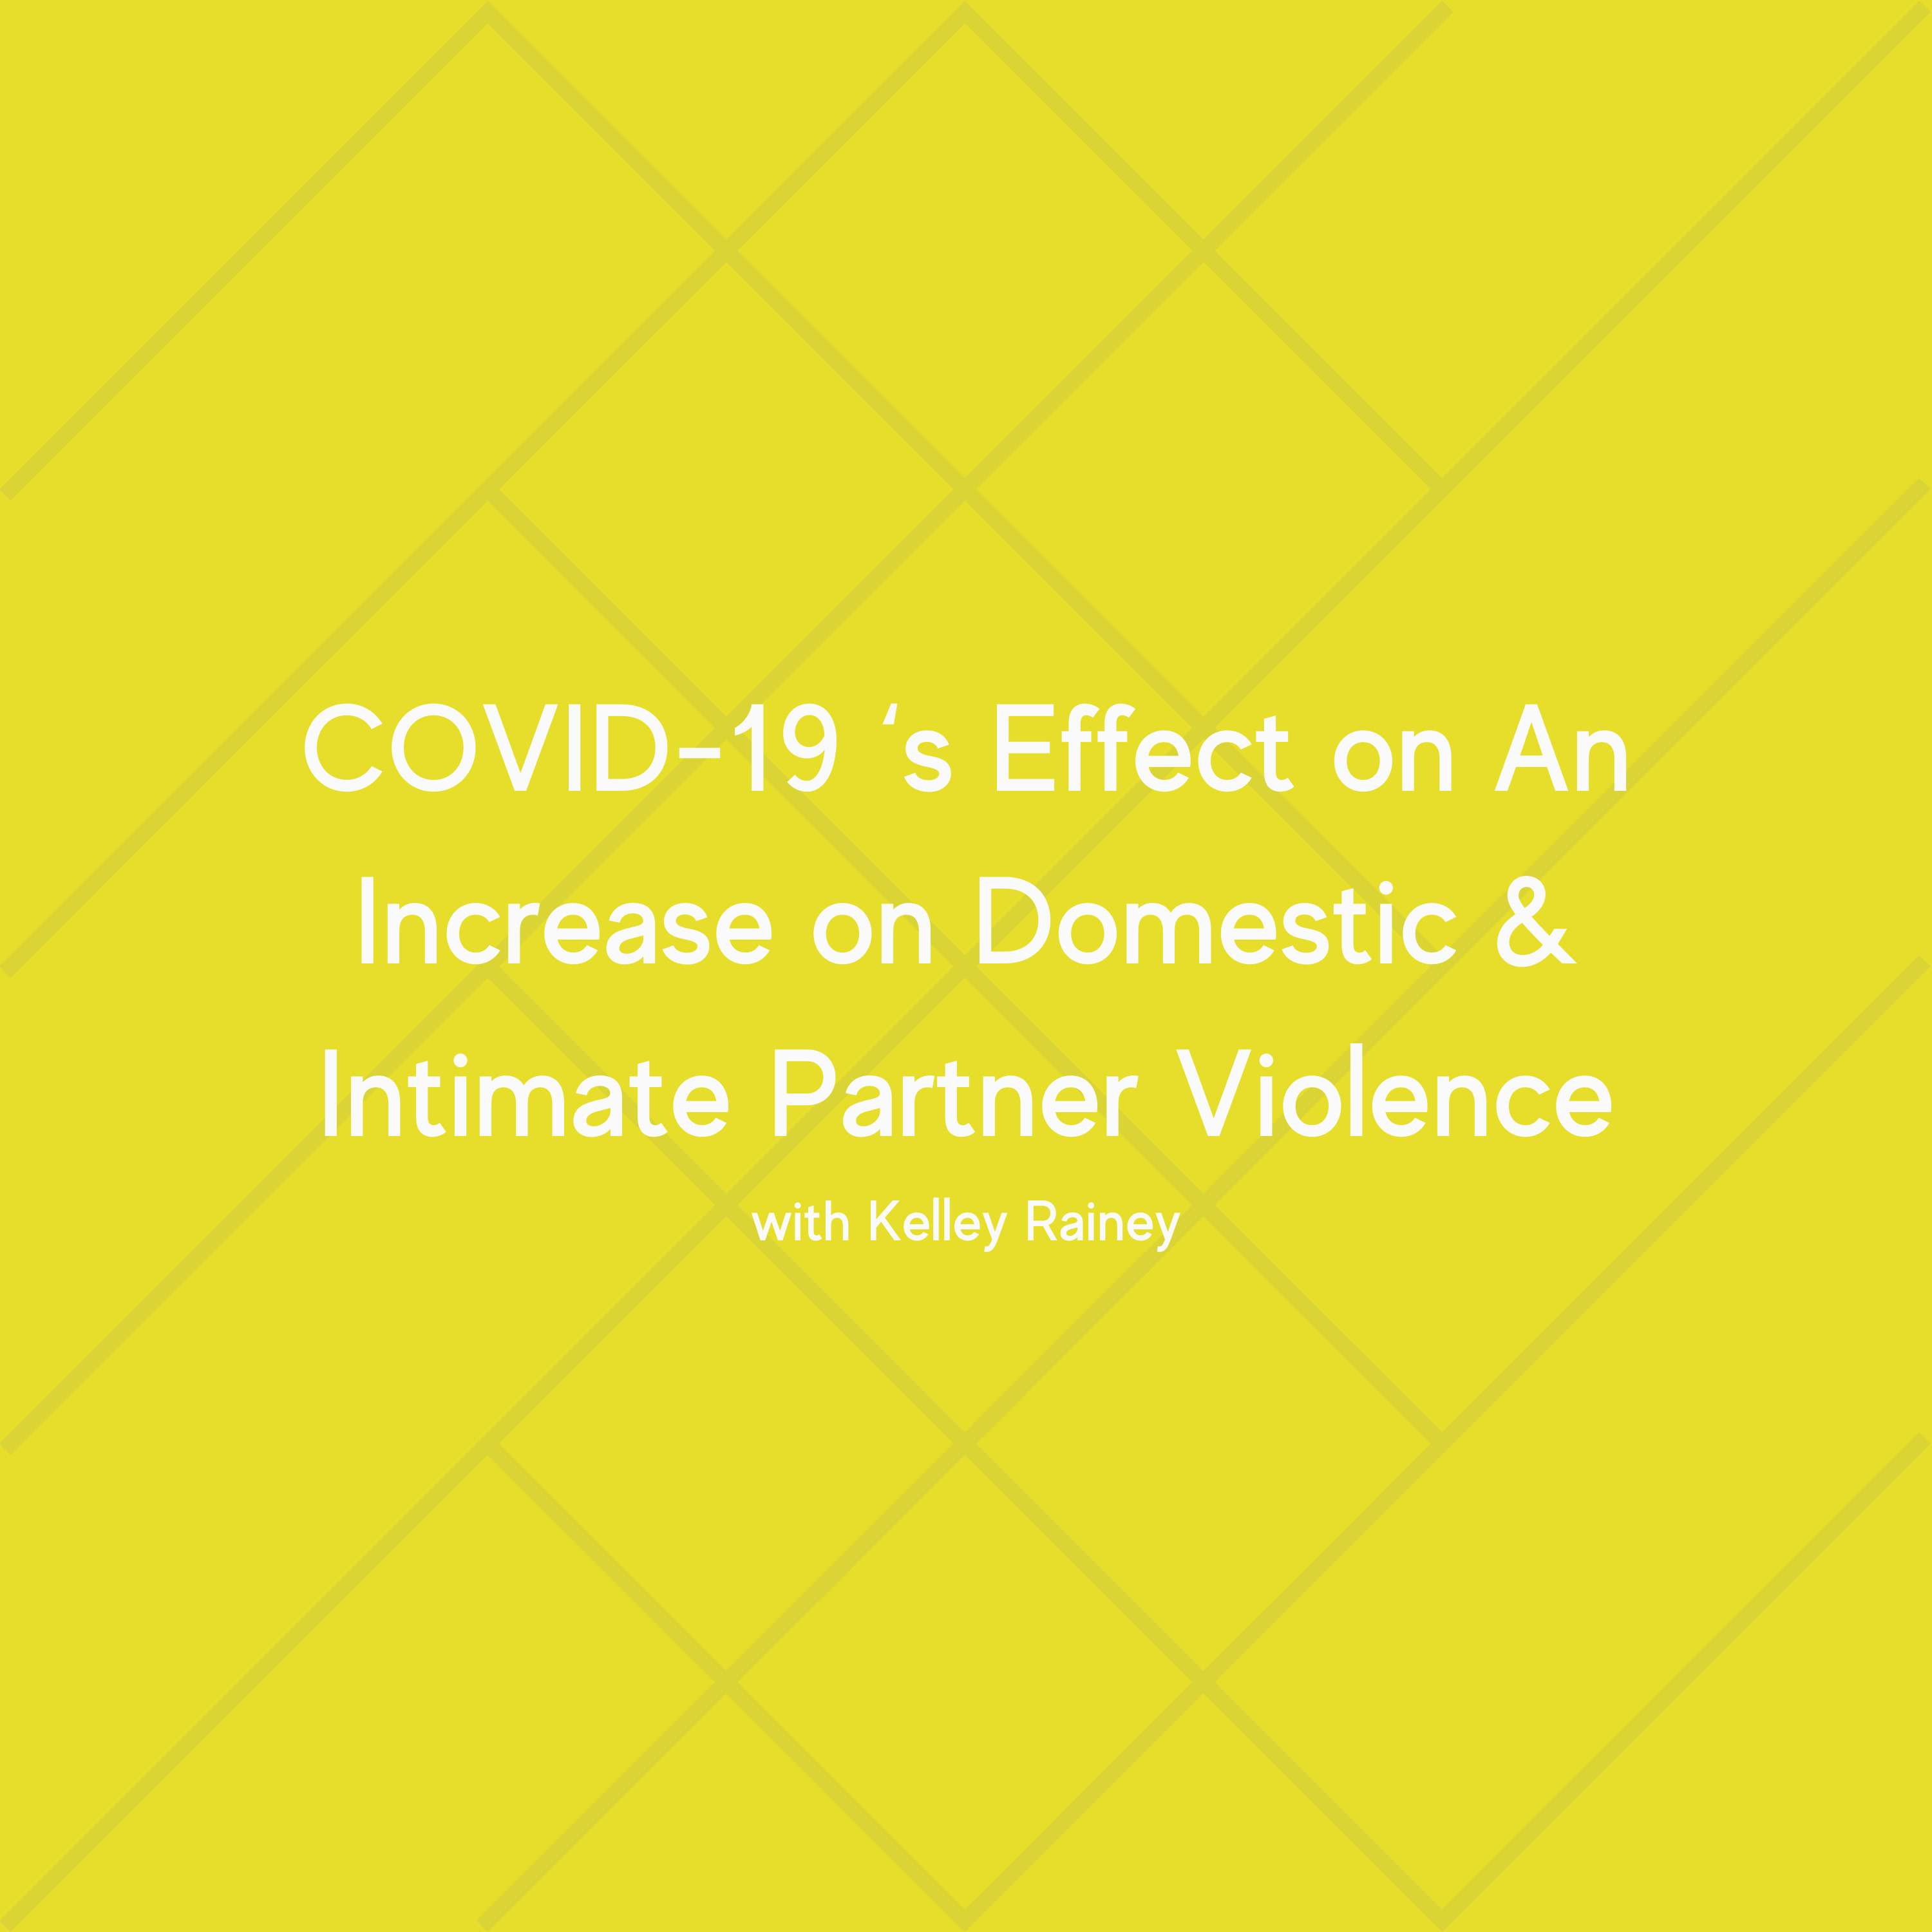 COVID-19 ‘s Effect on An Increase on Domestic & Intimate Partner Violence with Kelley Rainey